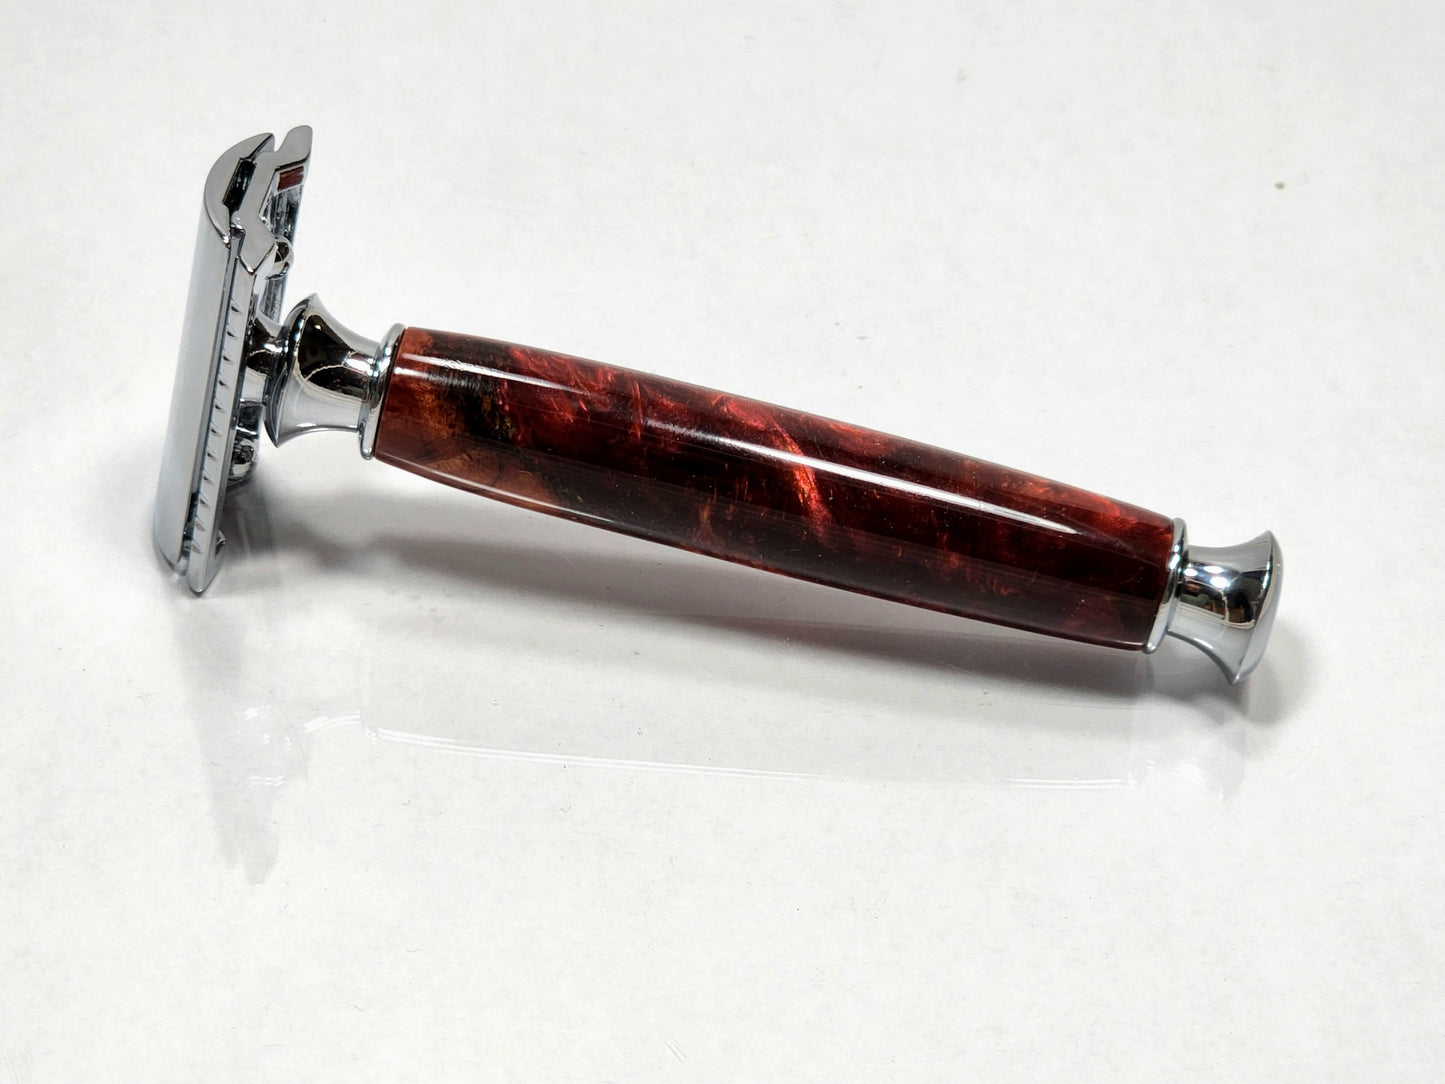 Elegant Handcrafted Hybrid Wood/Acrylic Classic Safety Razor with Chrome-Plated Brass Components